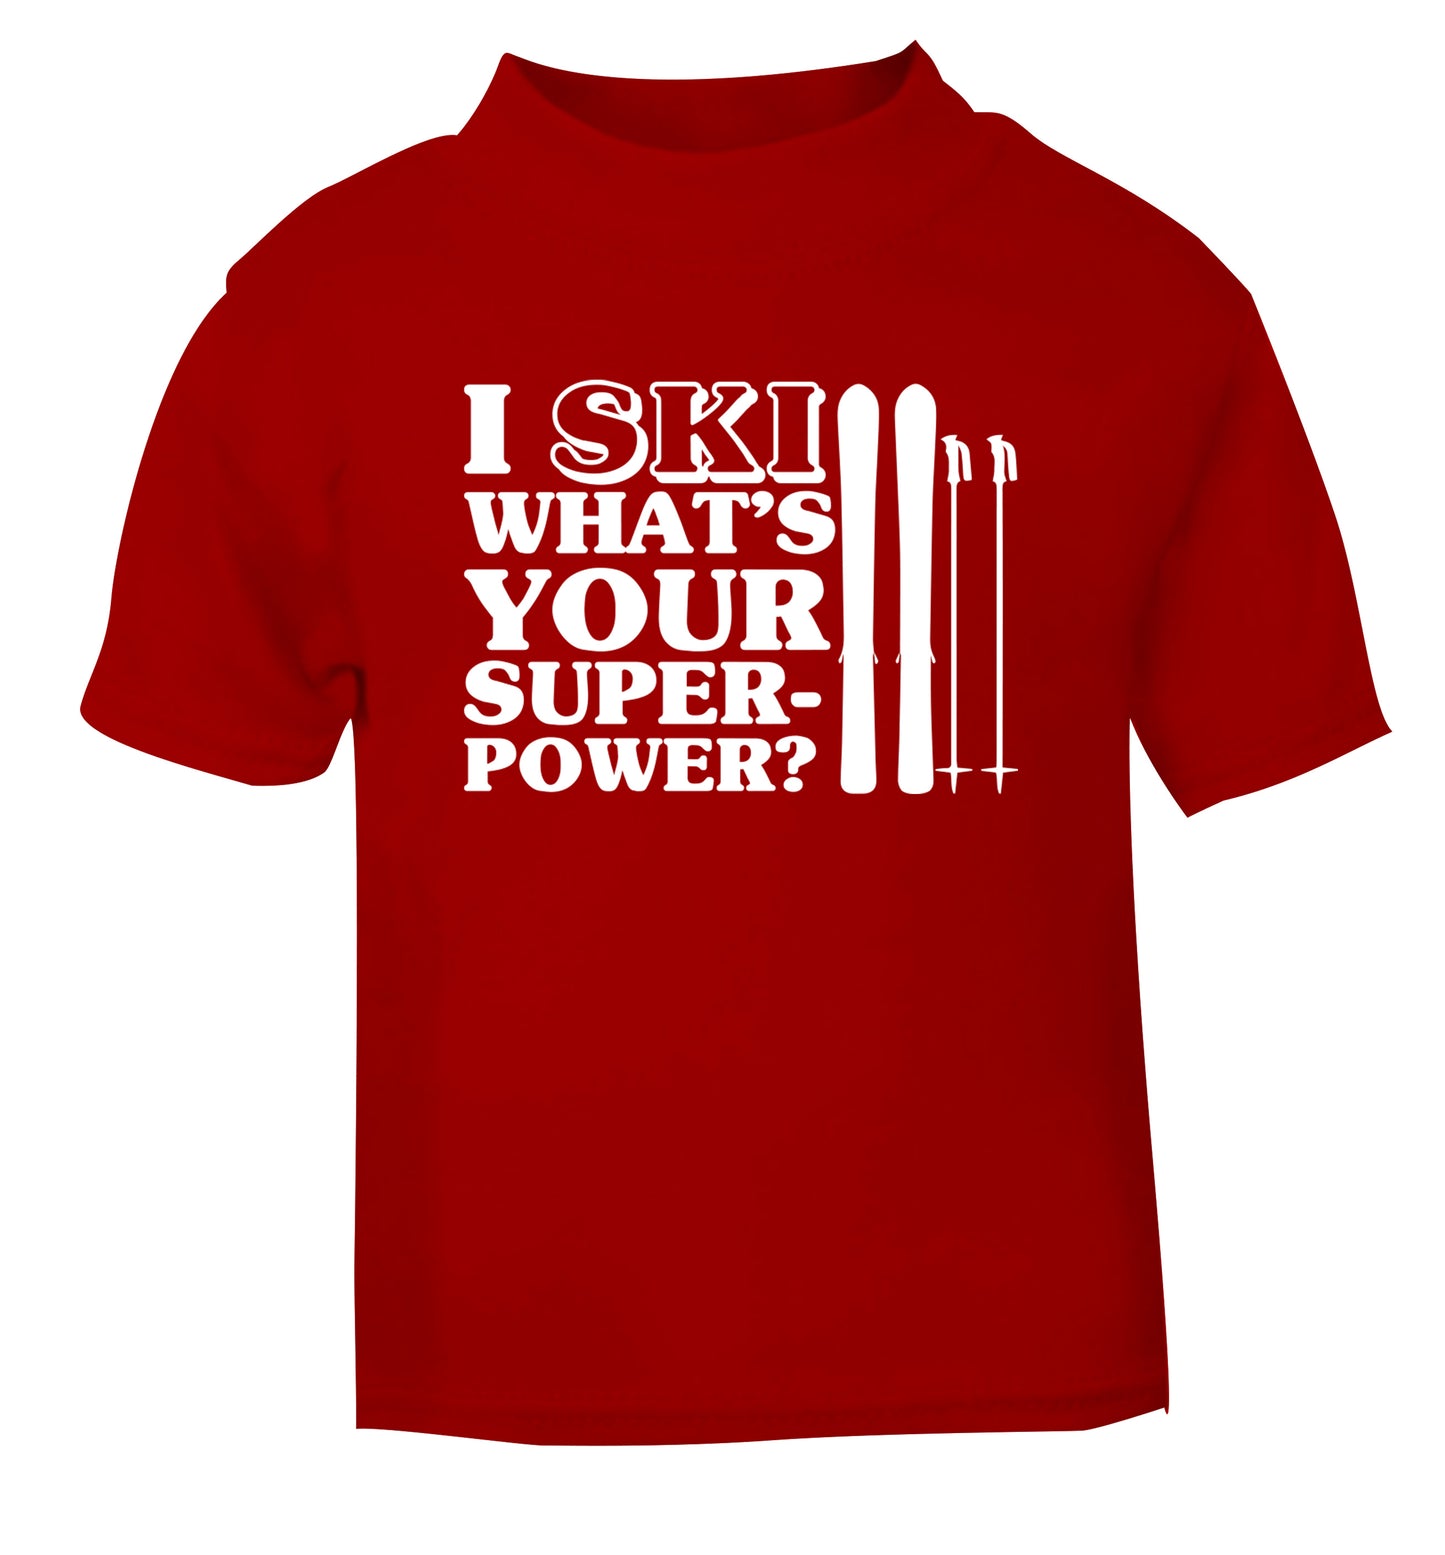 I ski what's your superpower? red Baby Toddler Tshirt 2 Years